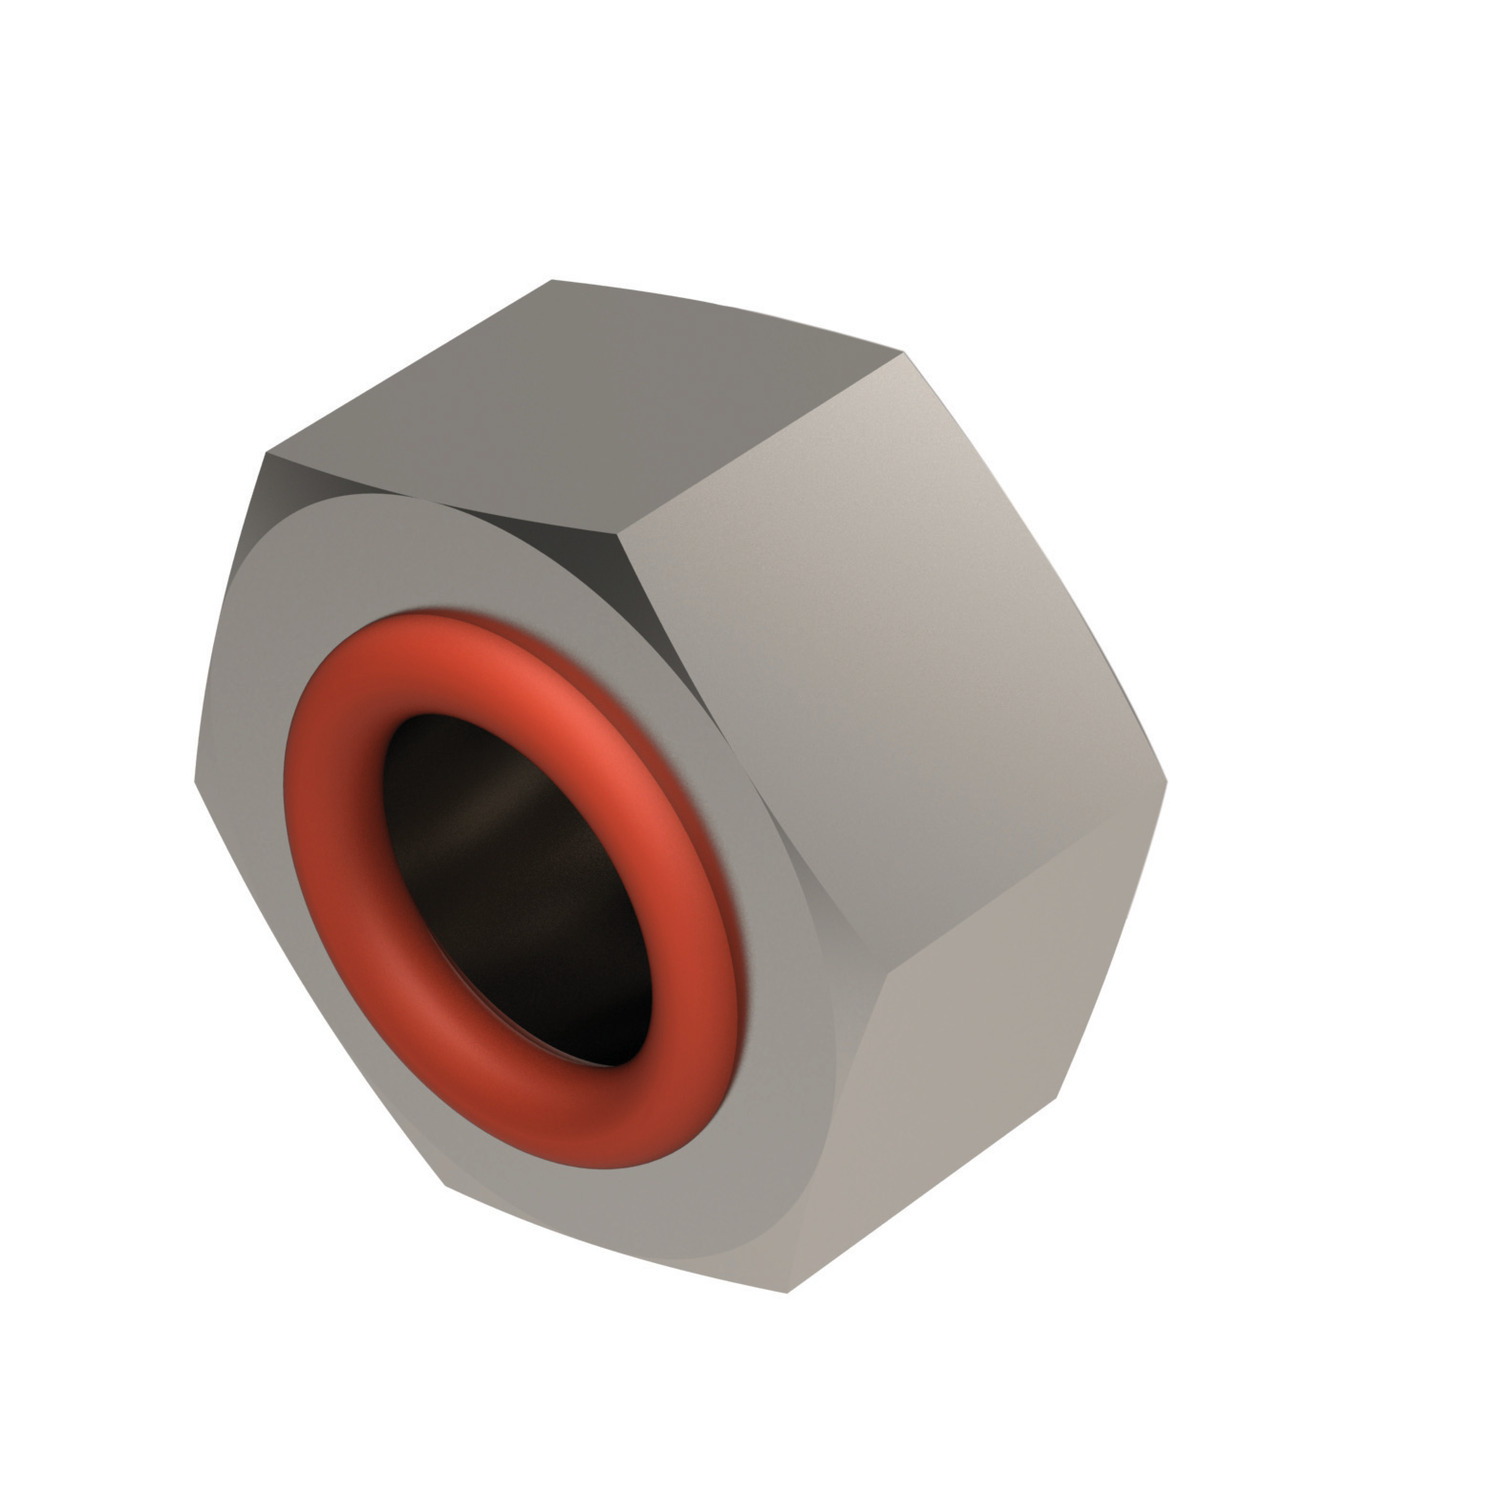 Integral Seal Hex. Nuts Integral seal hex nut sizes range from M2 to M16